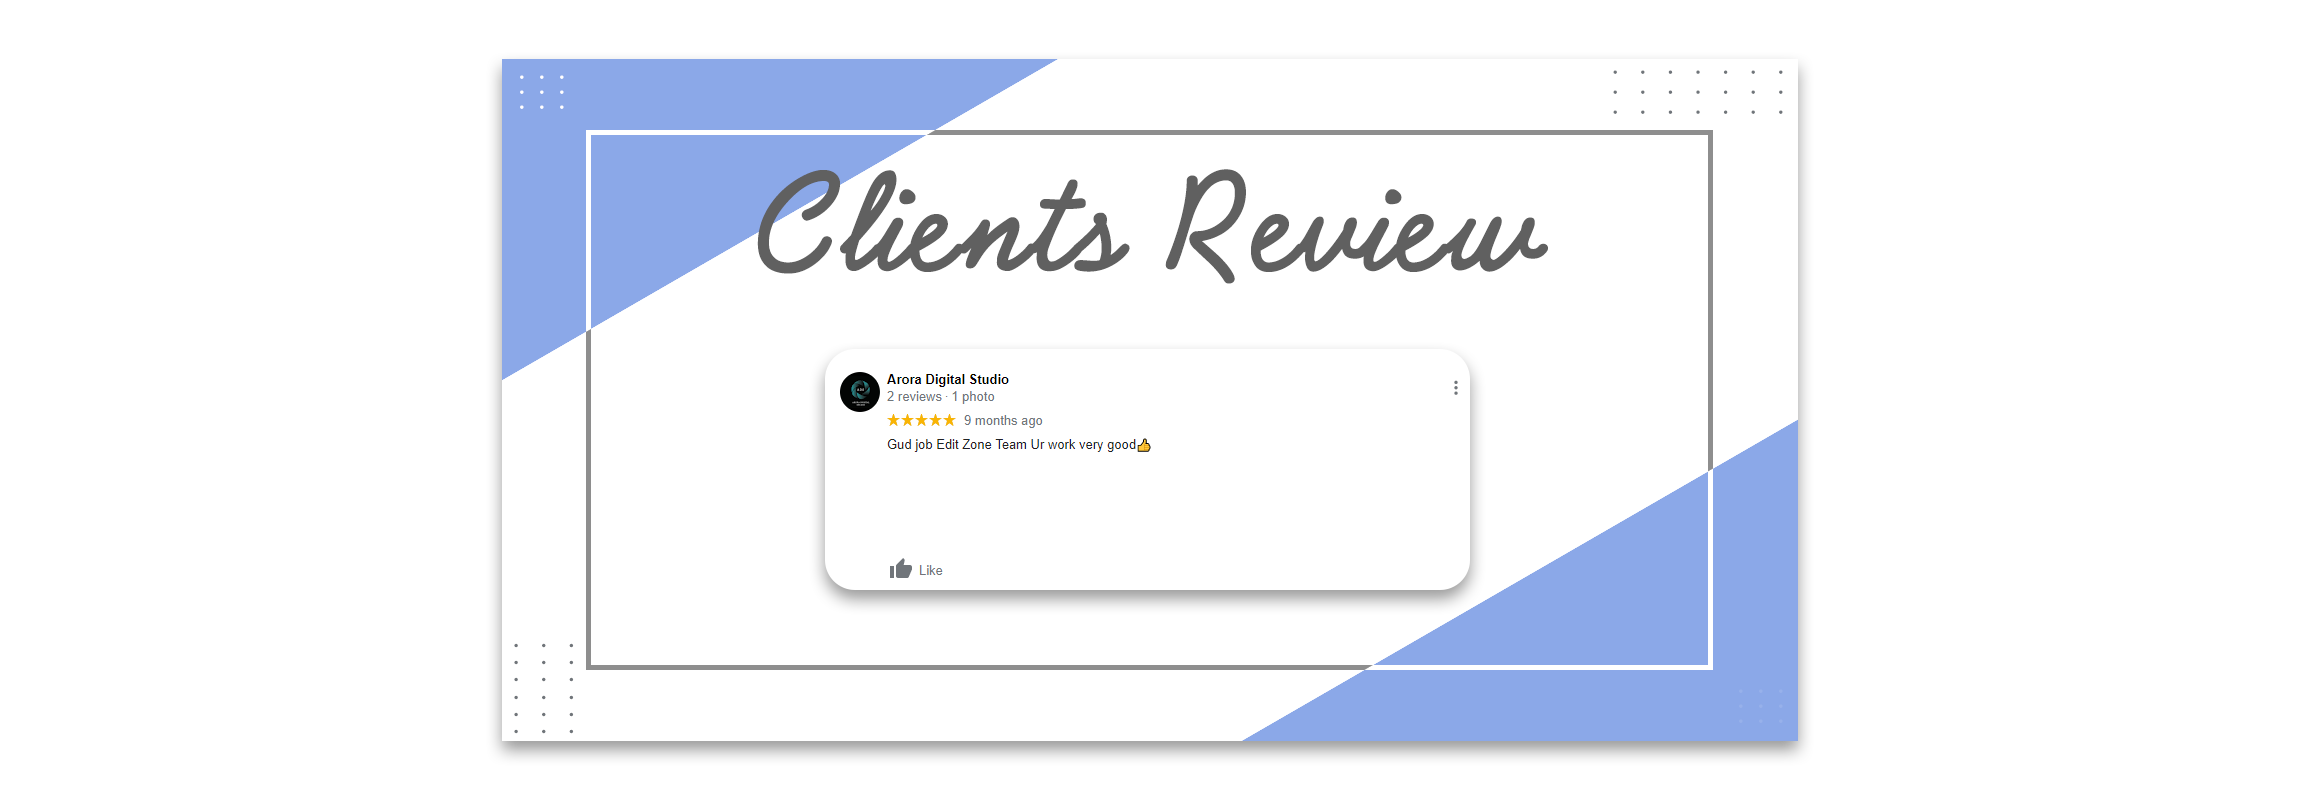 google client review img edit zone india 22